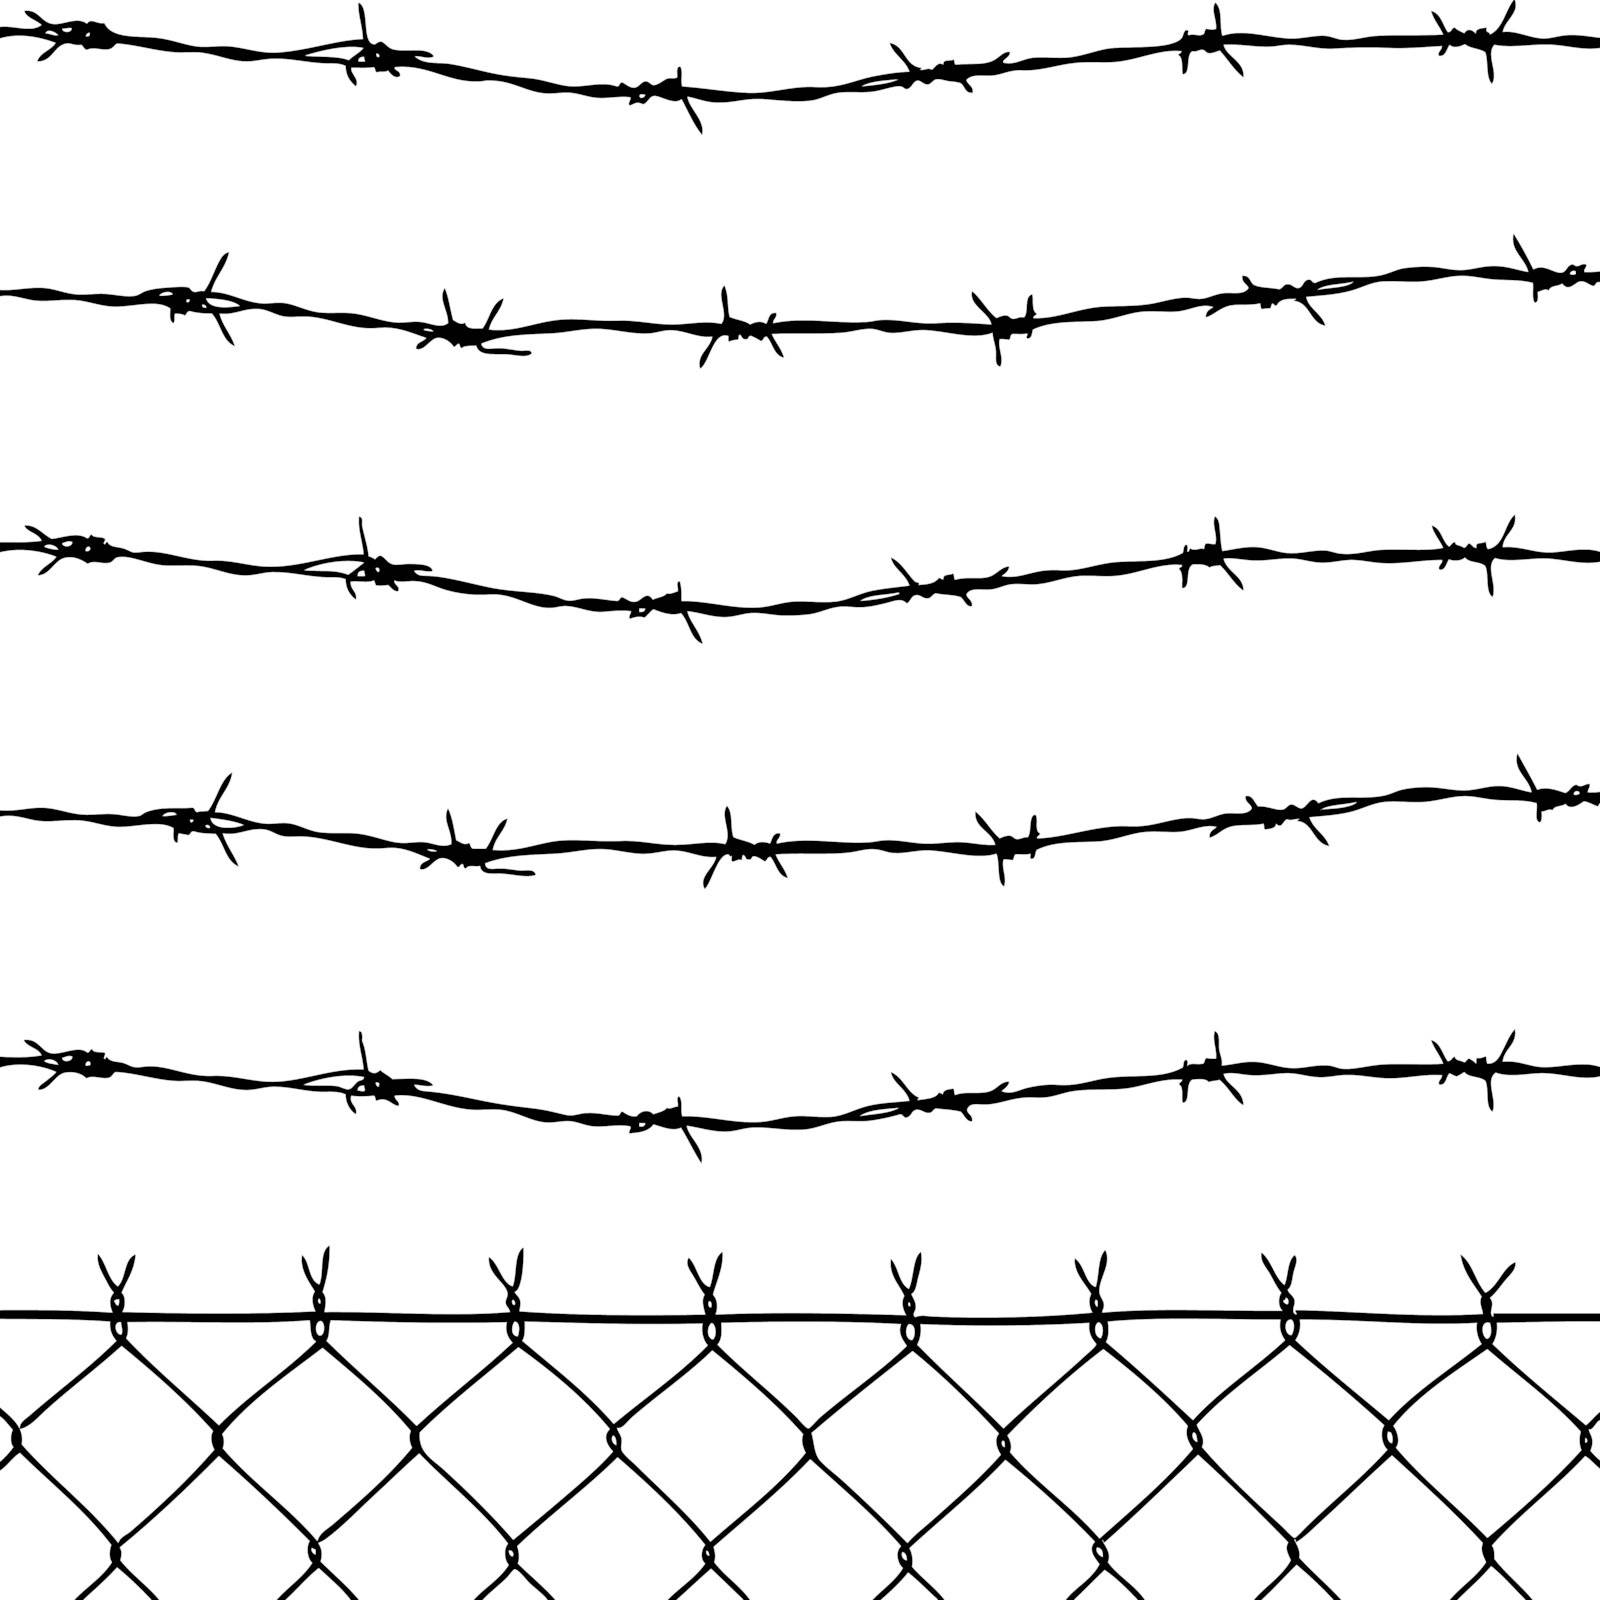 wired fence with five barbed wires